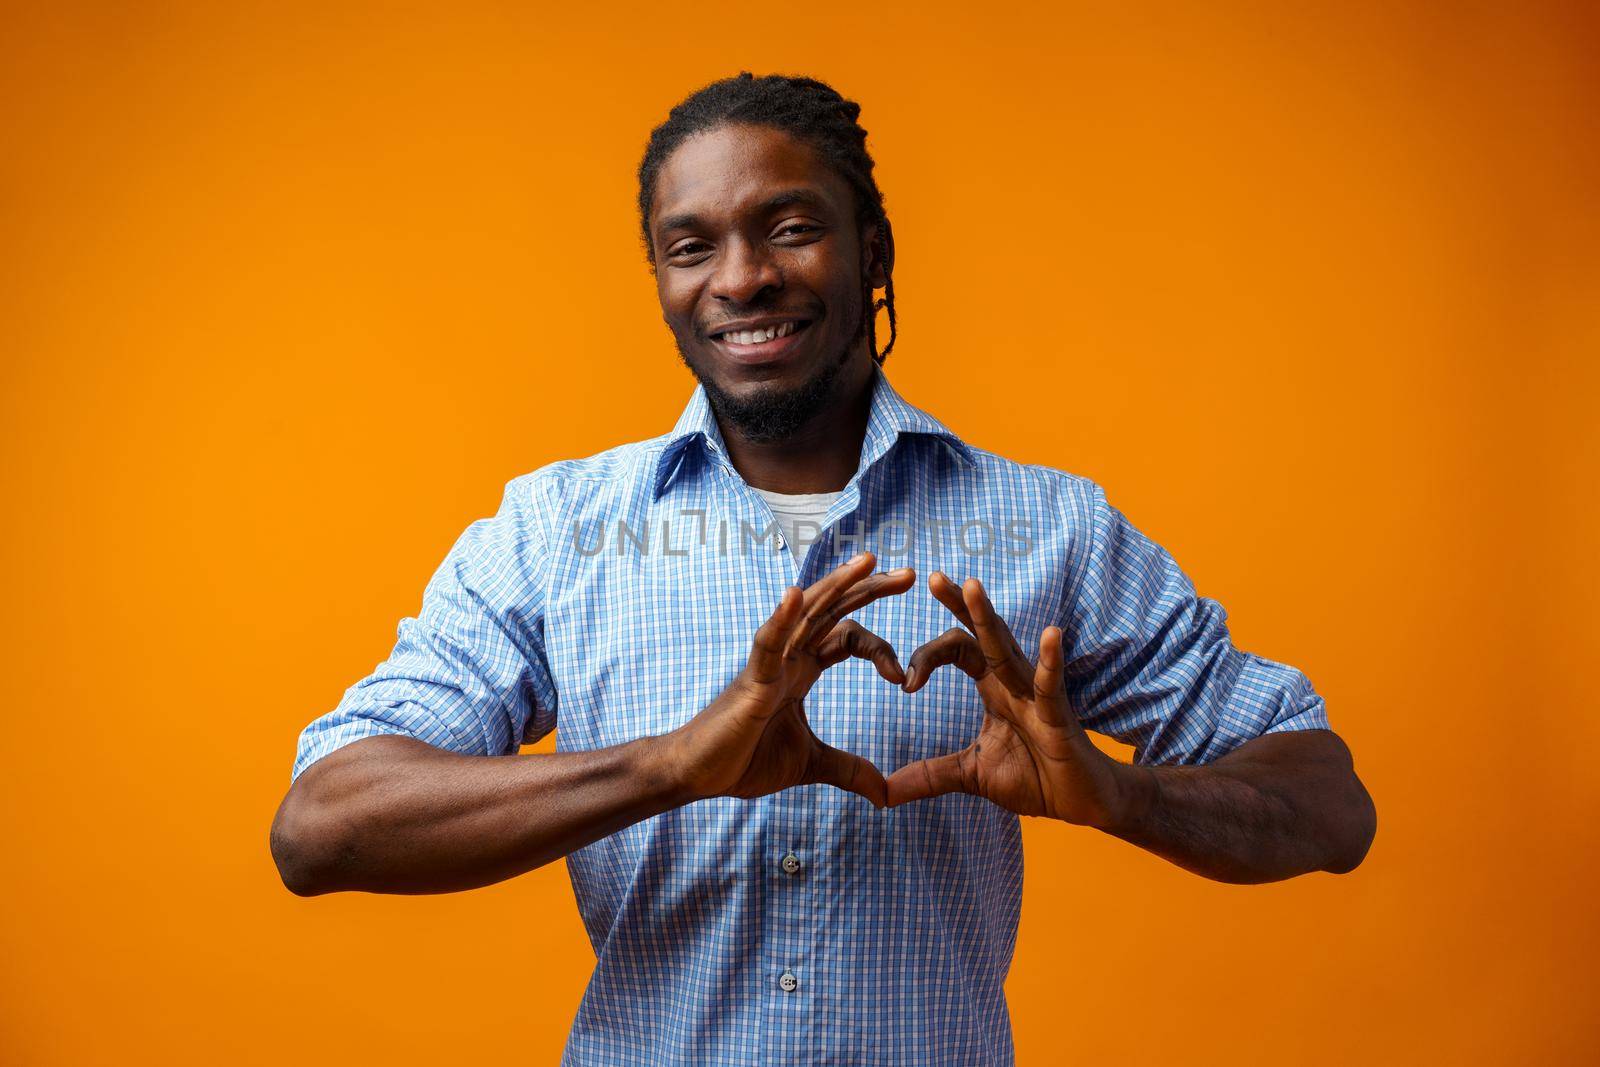 Young black man doing a heart sign over yellow background, close up